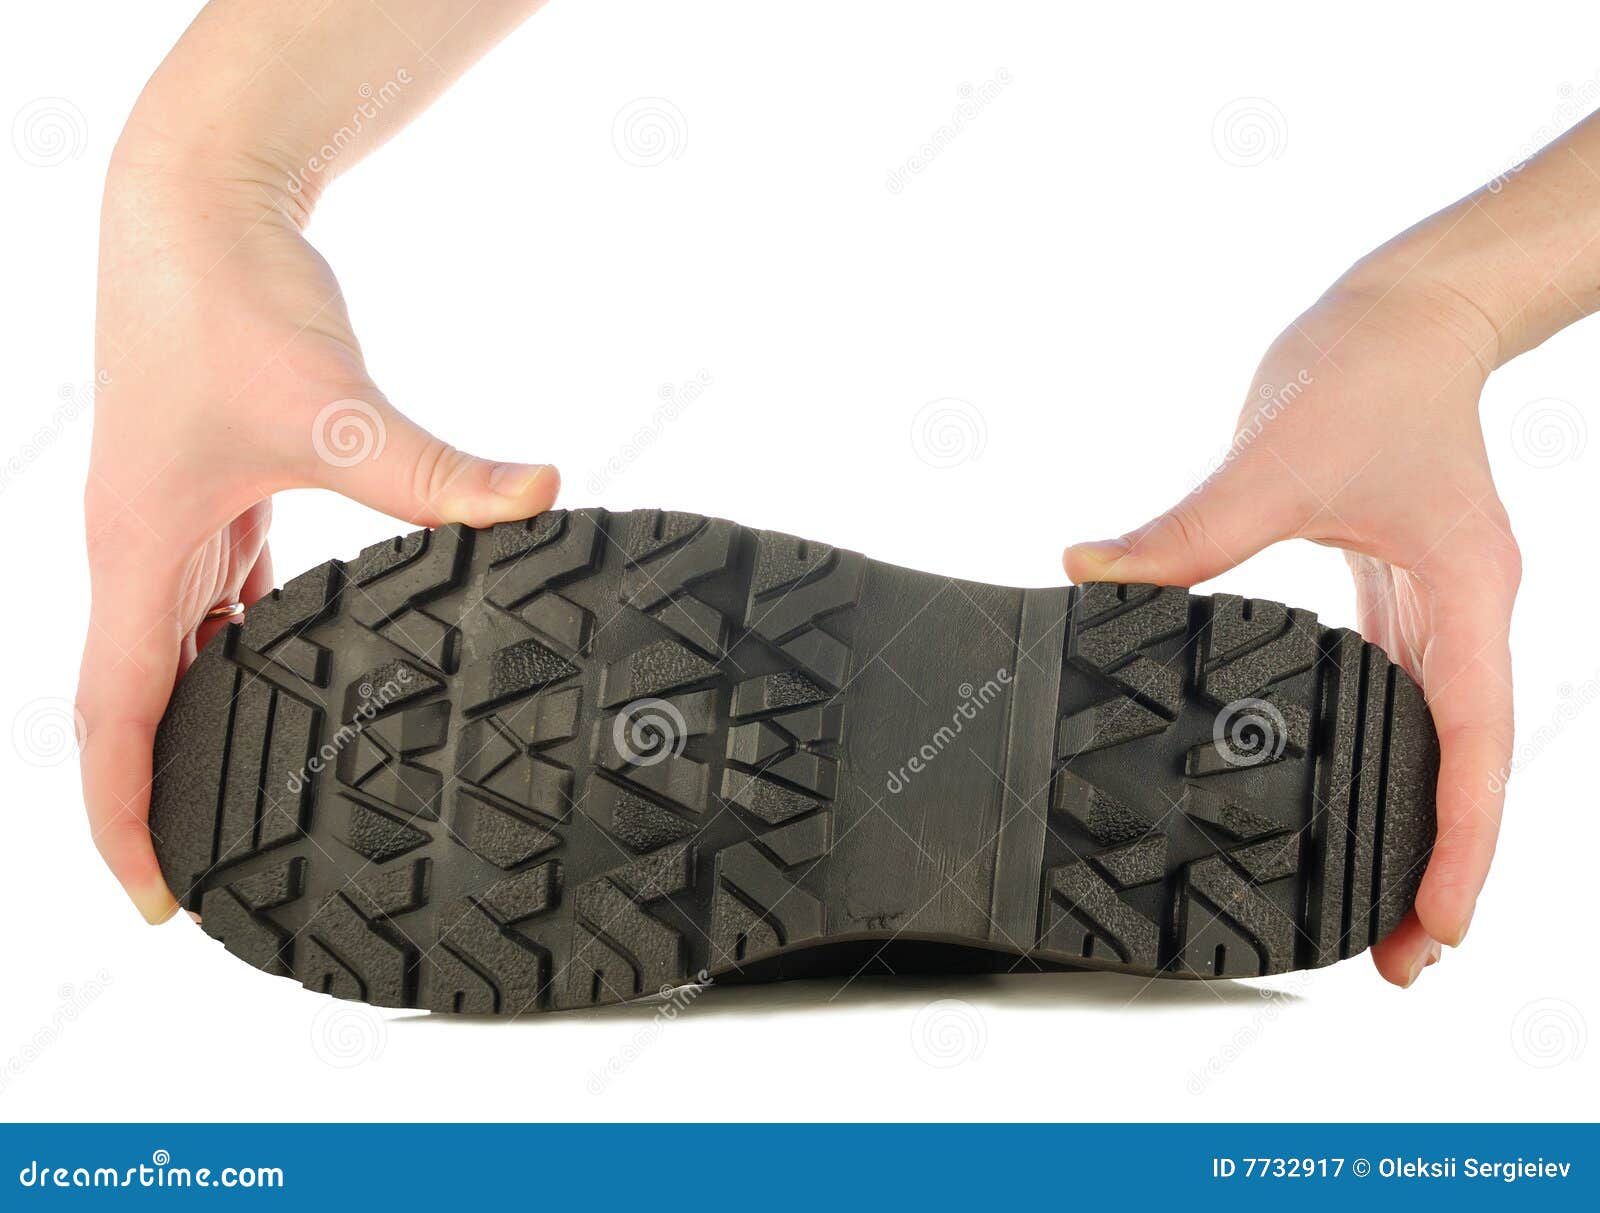 Smooth and rough shoe soles - Stock Image - C014/6945 - Science Photo  Library